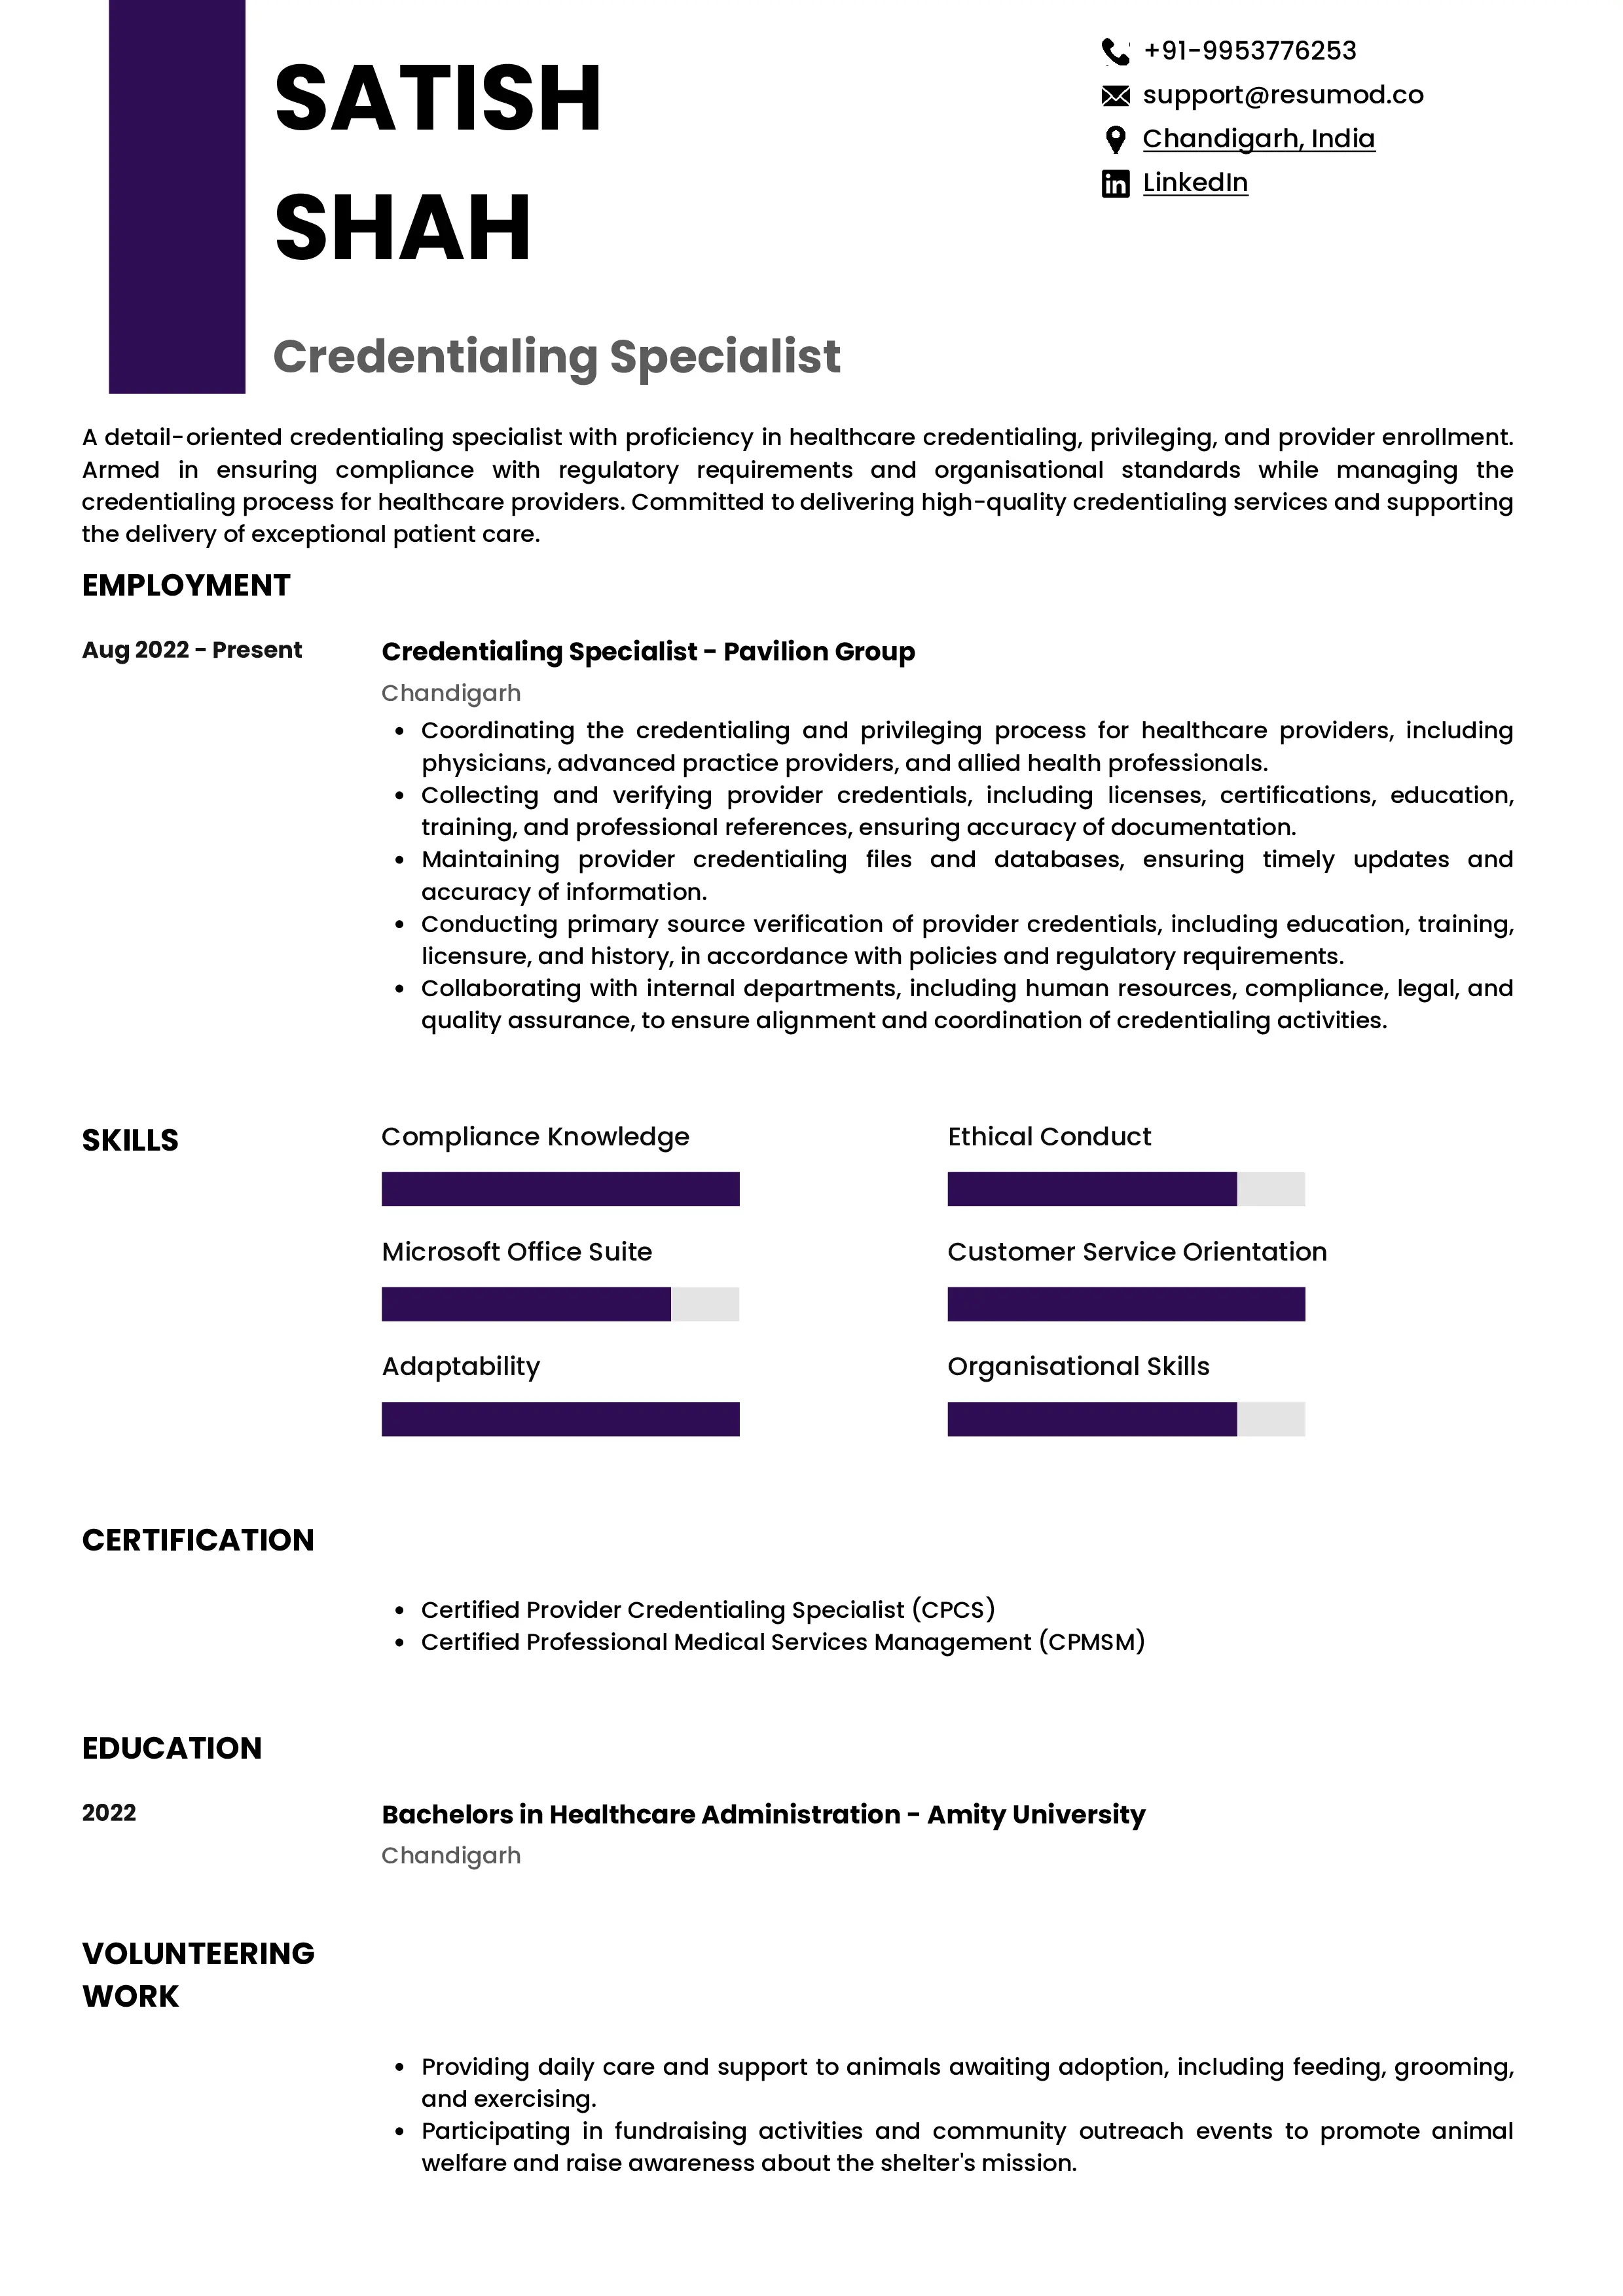 Sample Resume of Credentialing Specialist | Free Resume Templates & Samples on Resumod.co